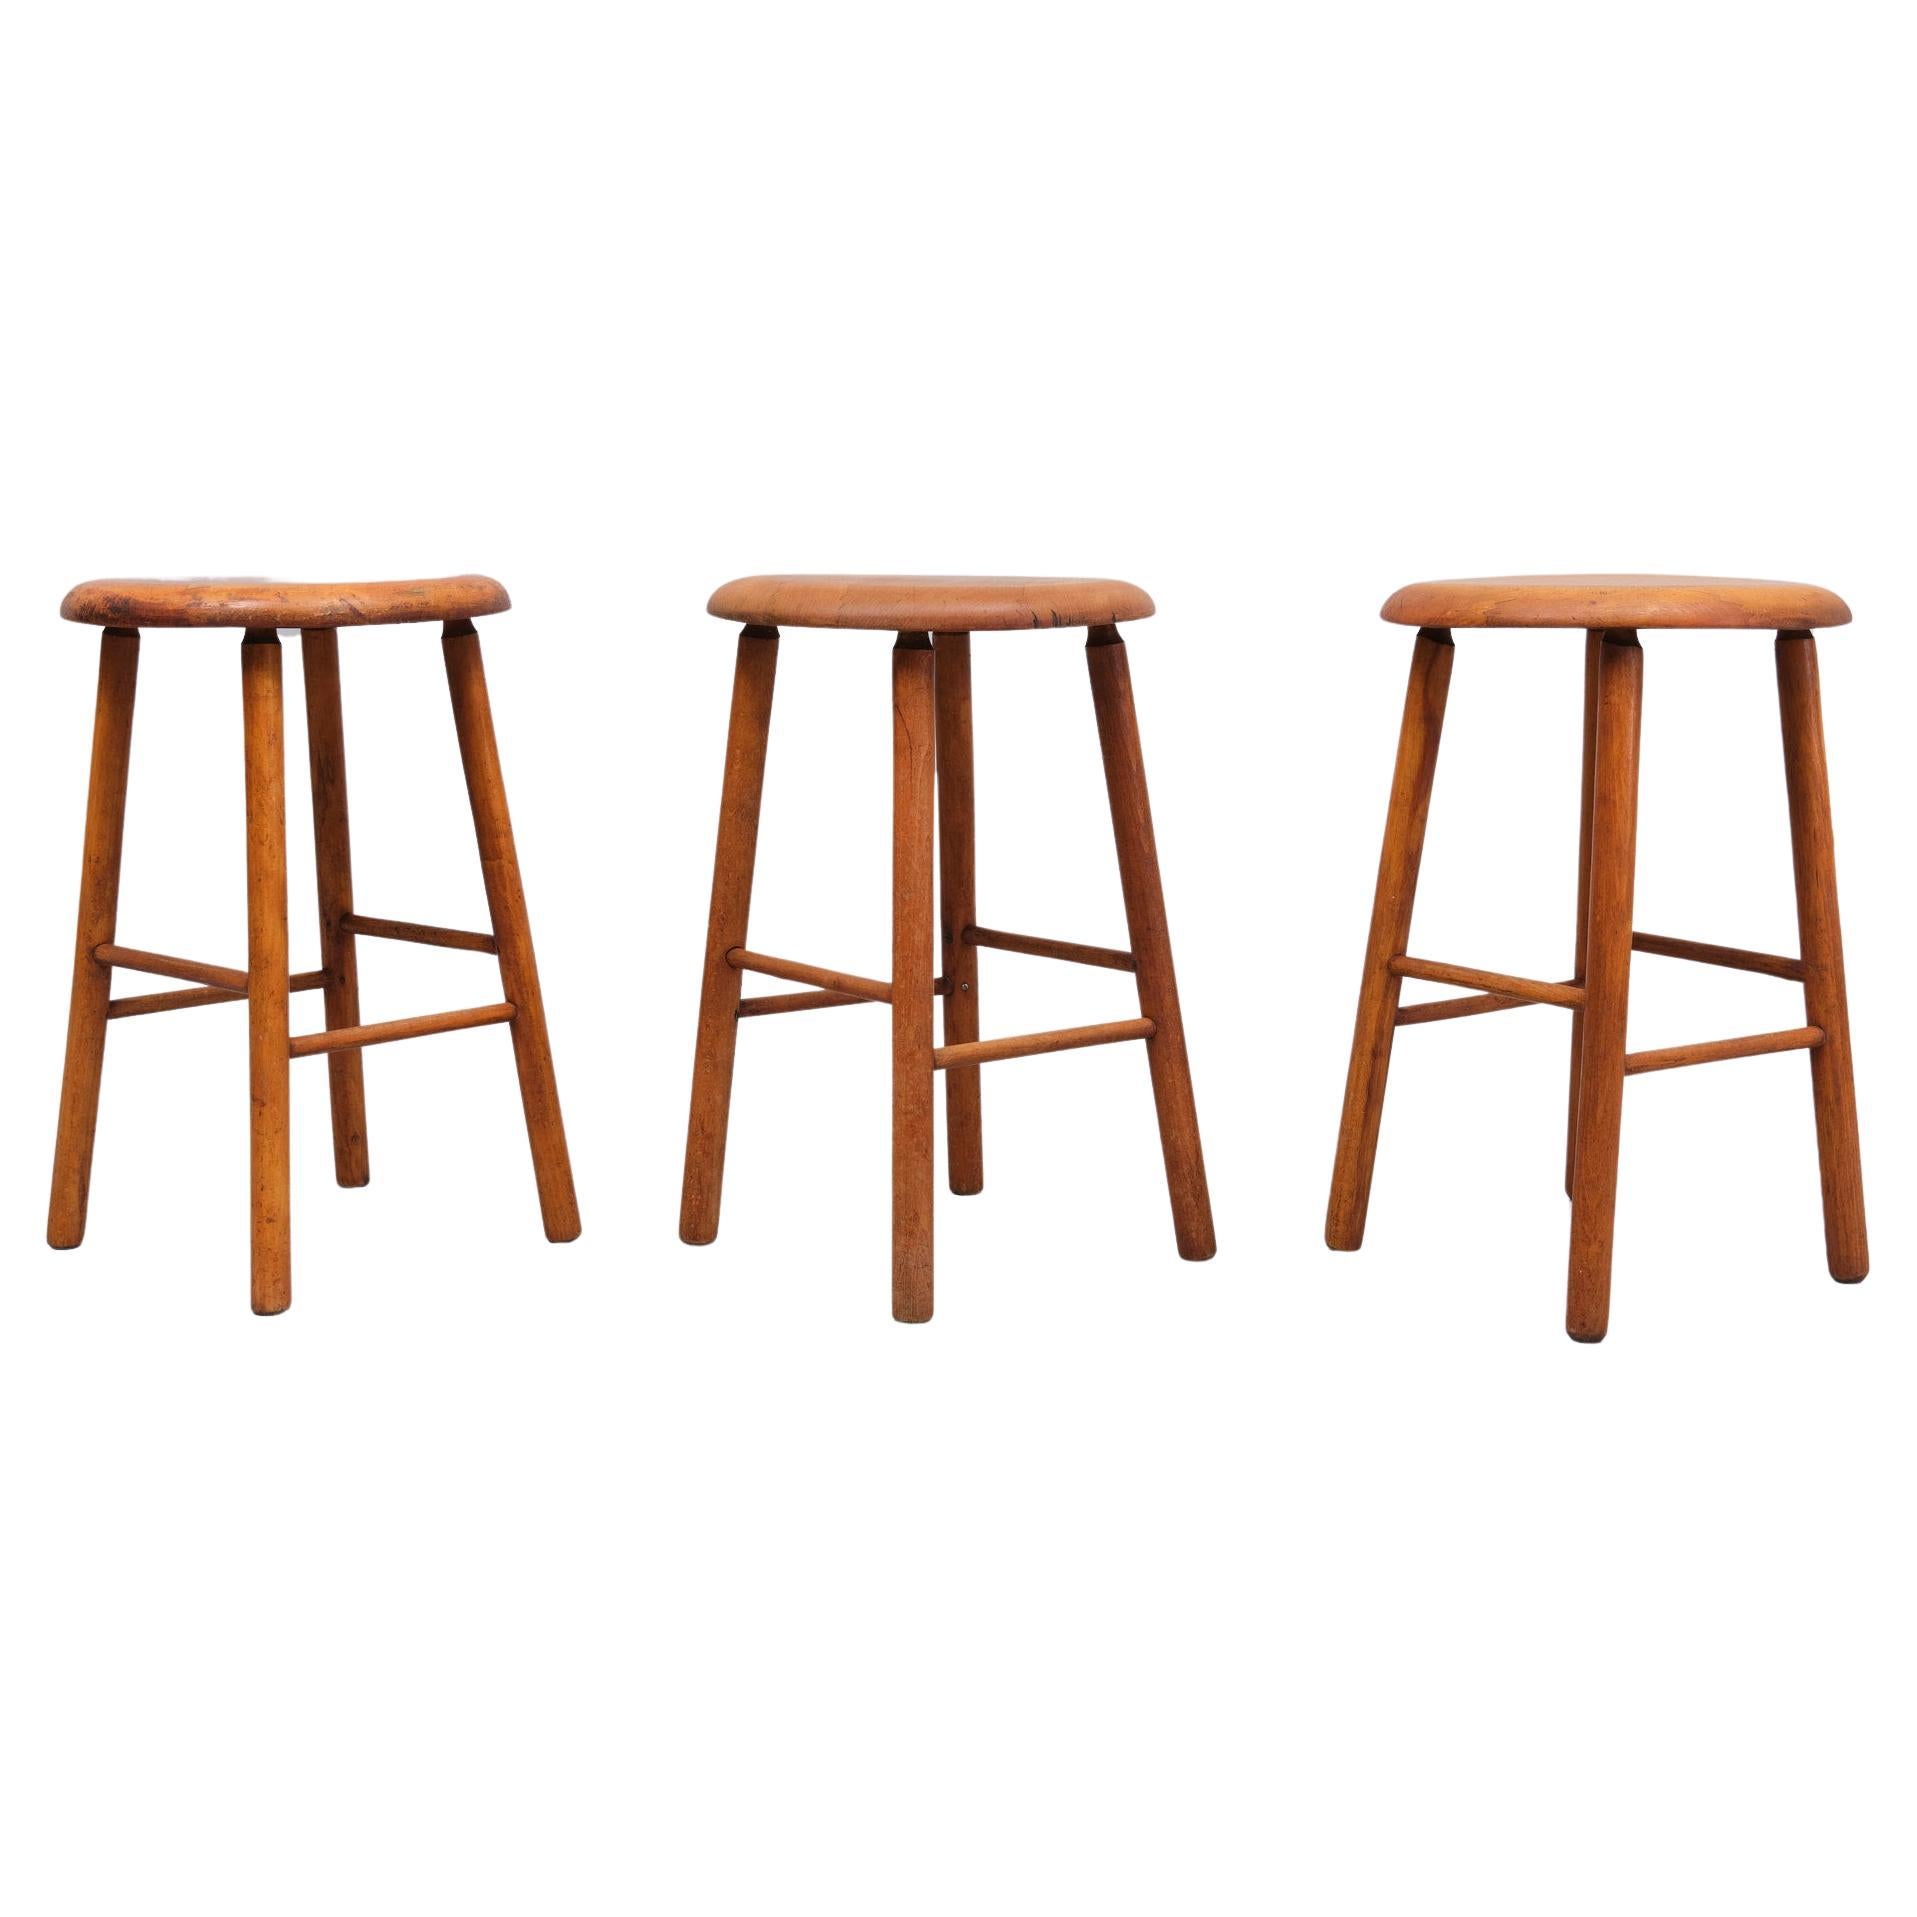 Rustic Three authentic wooden stools  1950s Holland  For Sale